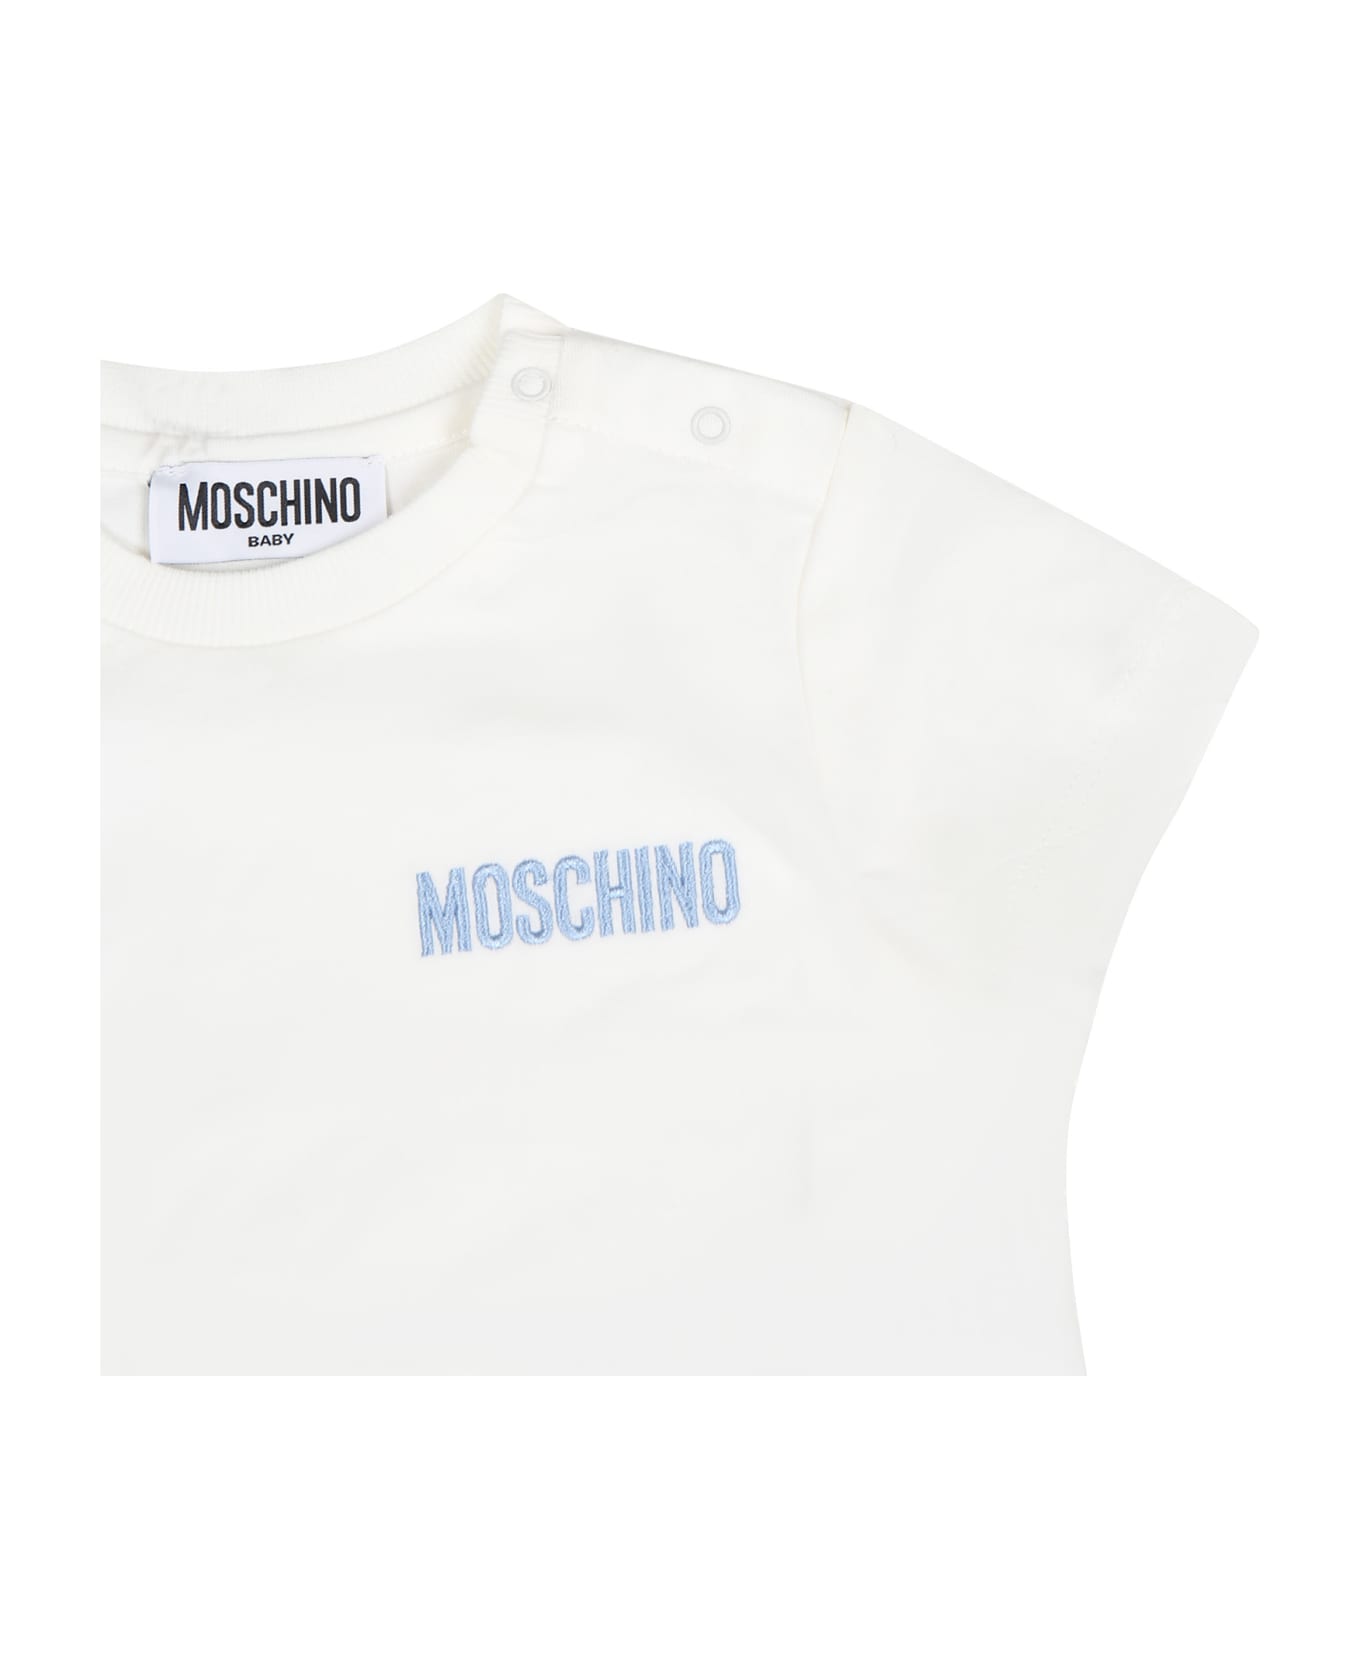 Moschino Multicolor Sports Suit For Baby Boy With Logo - Multicolor